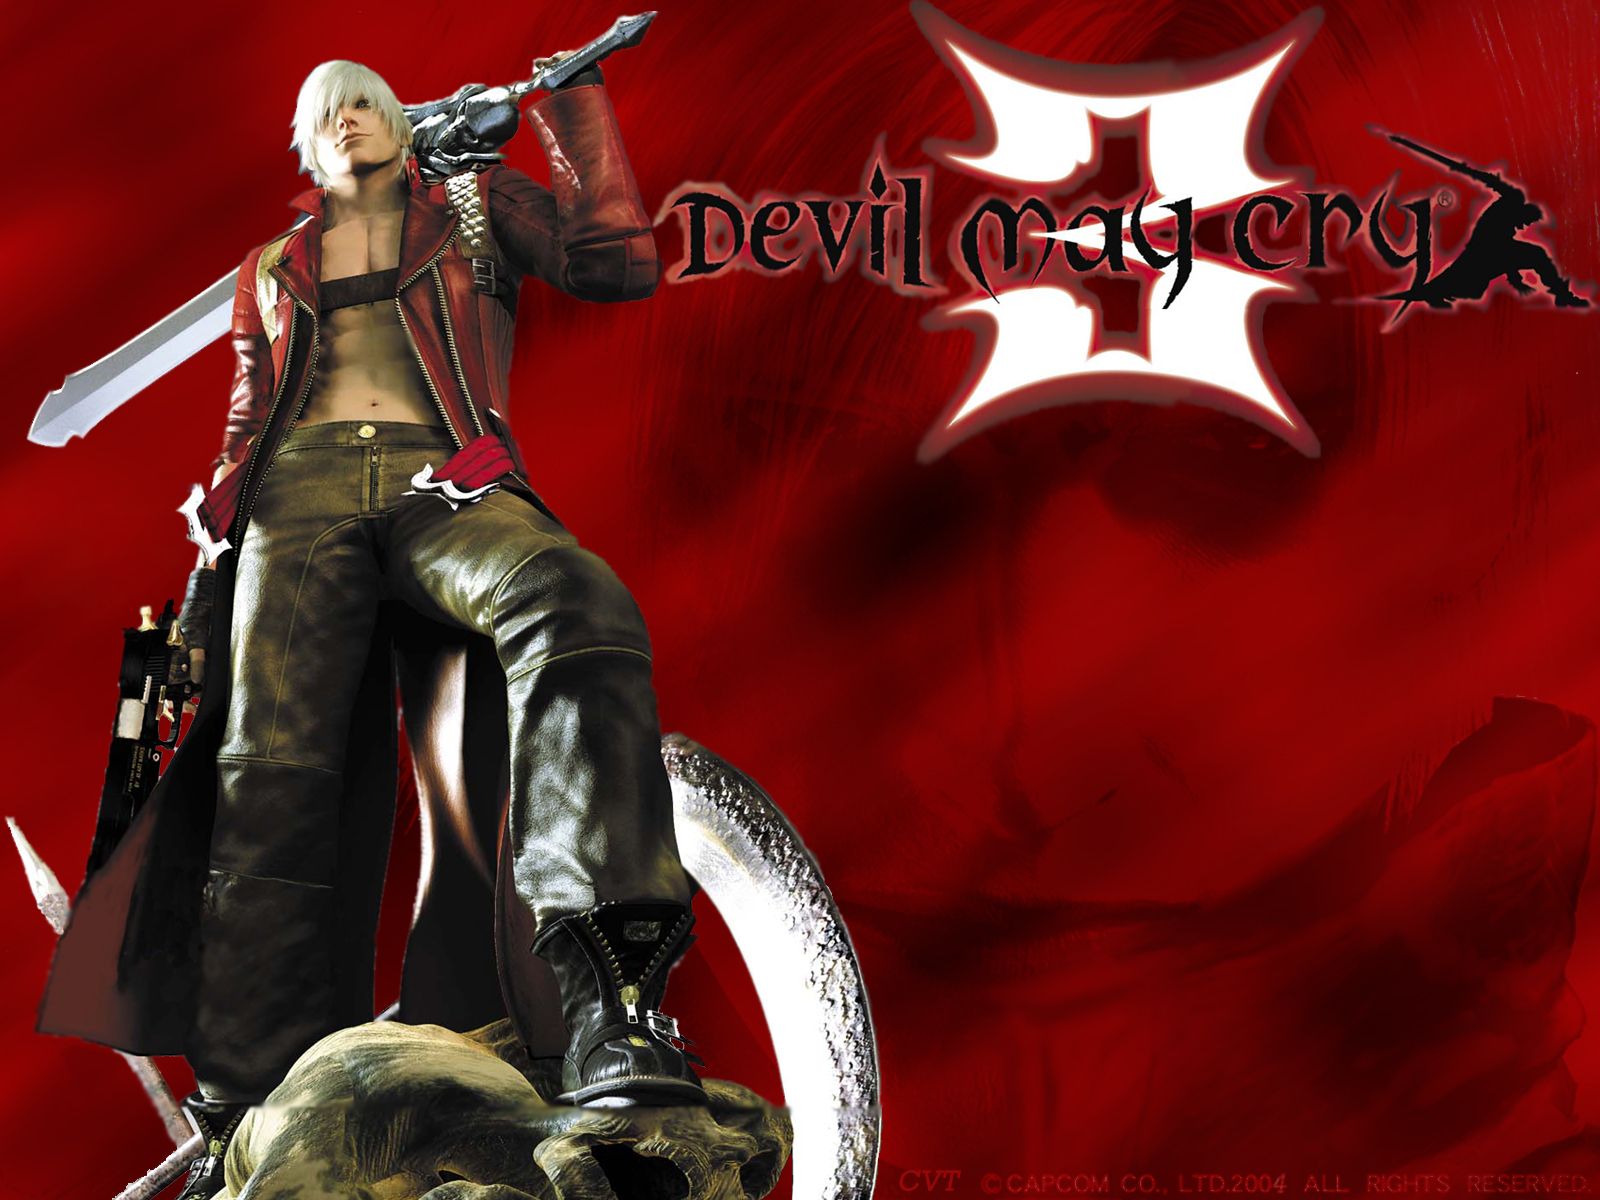 Dante Devil May Cry 3 - Devil May Cry 3 Wallpaper 10480515 - Fanpop